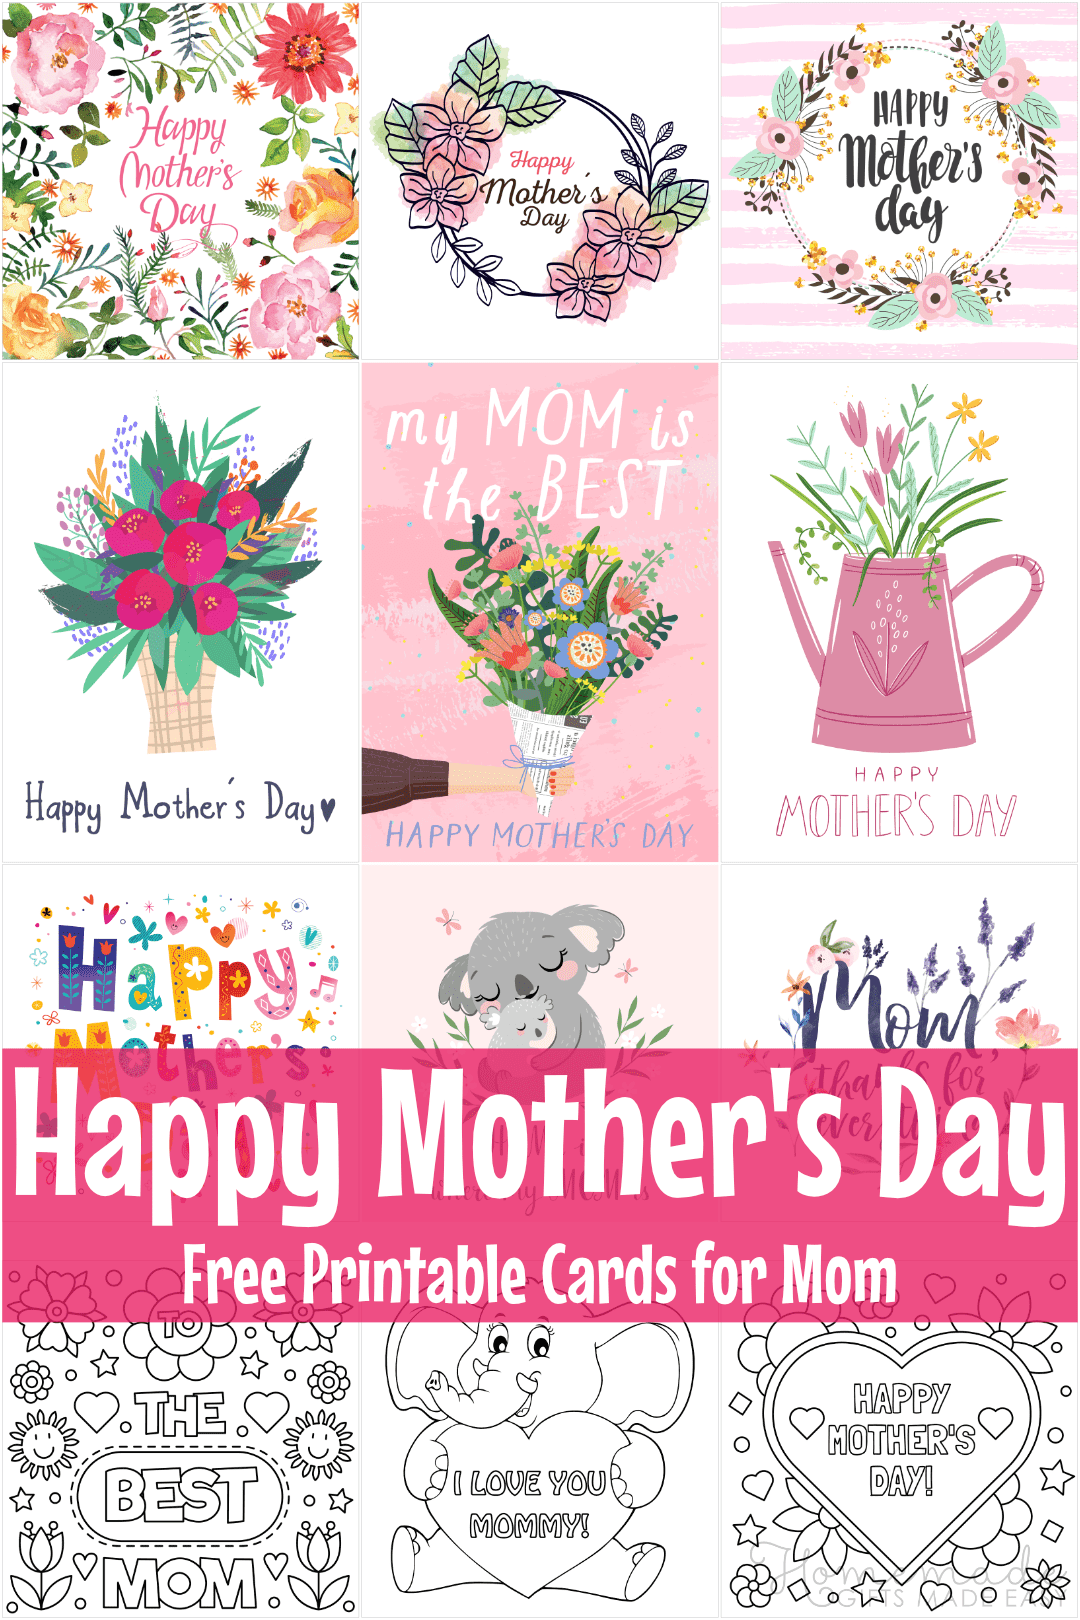 Printable Chocolates Mother's Day 5x7 Card